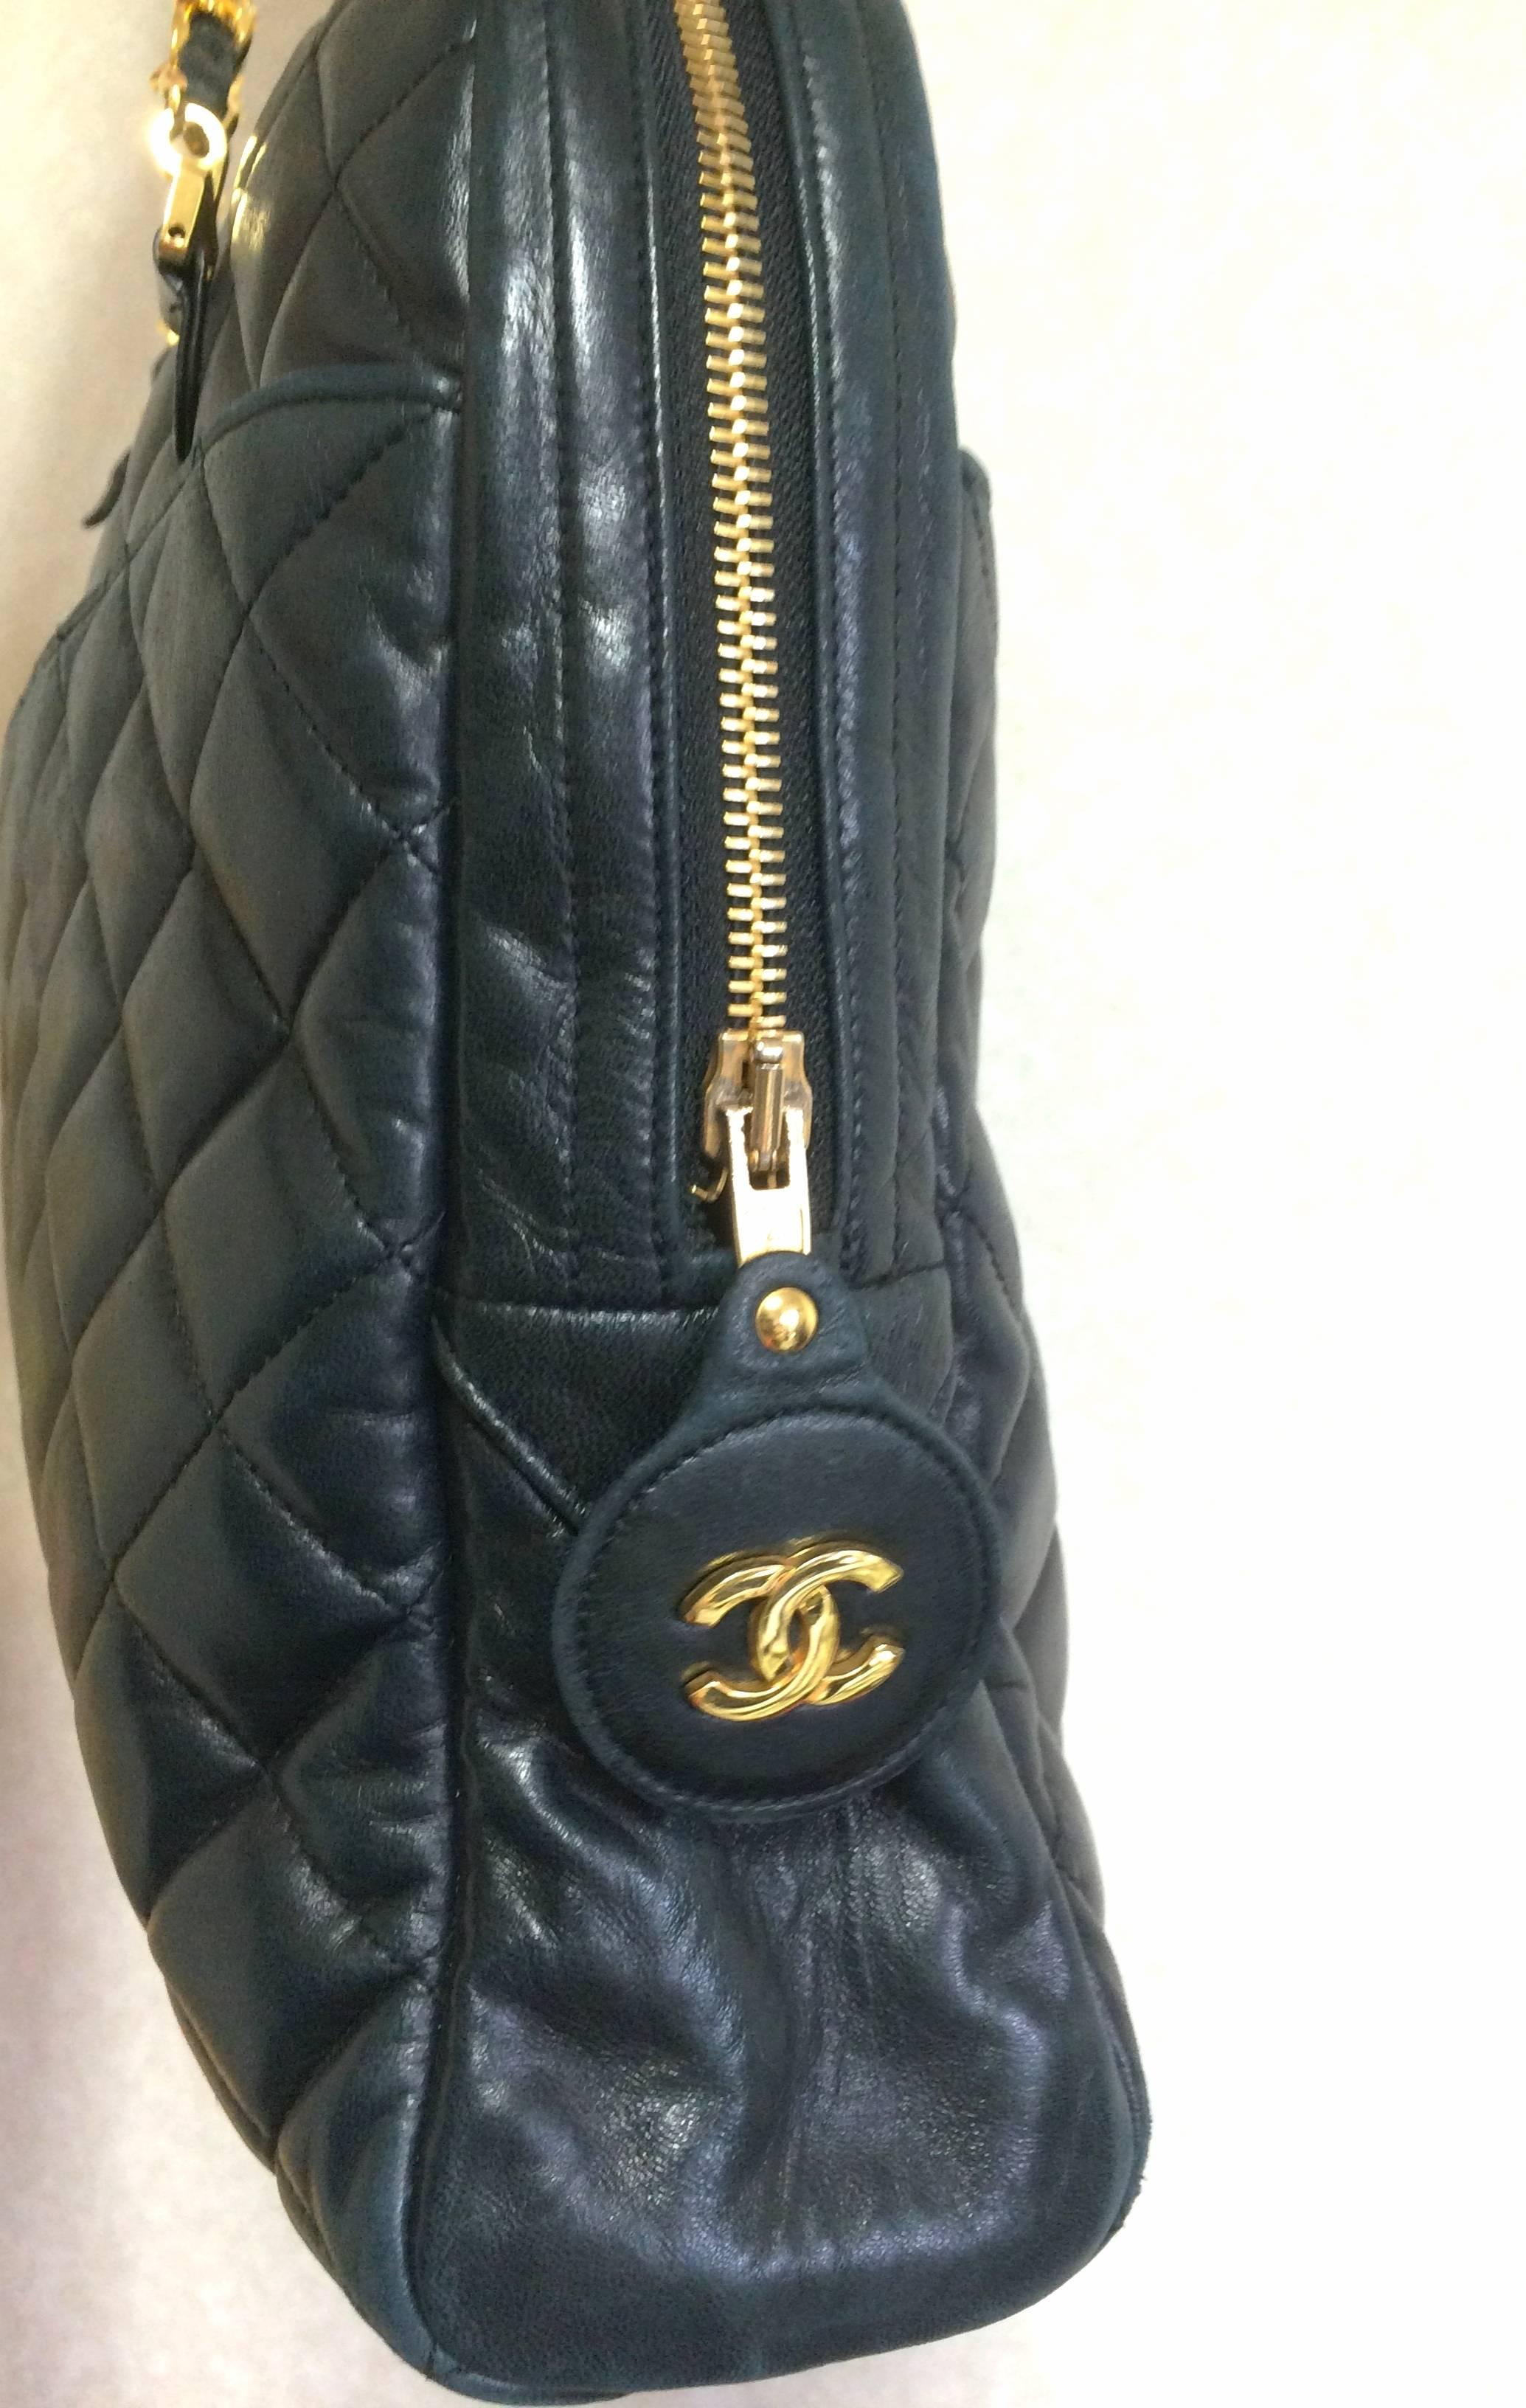 Black Vintage CHANEL black lambskin large classic bag with double golden chain strap